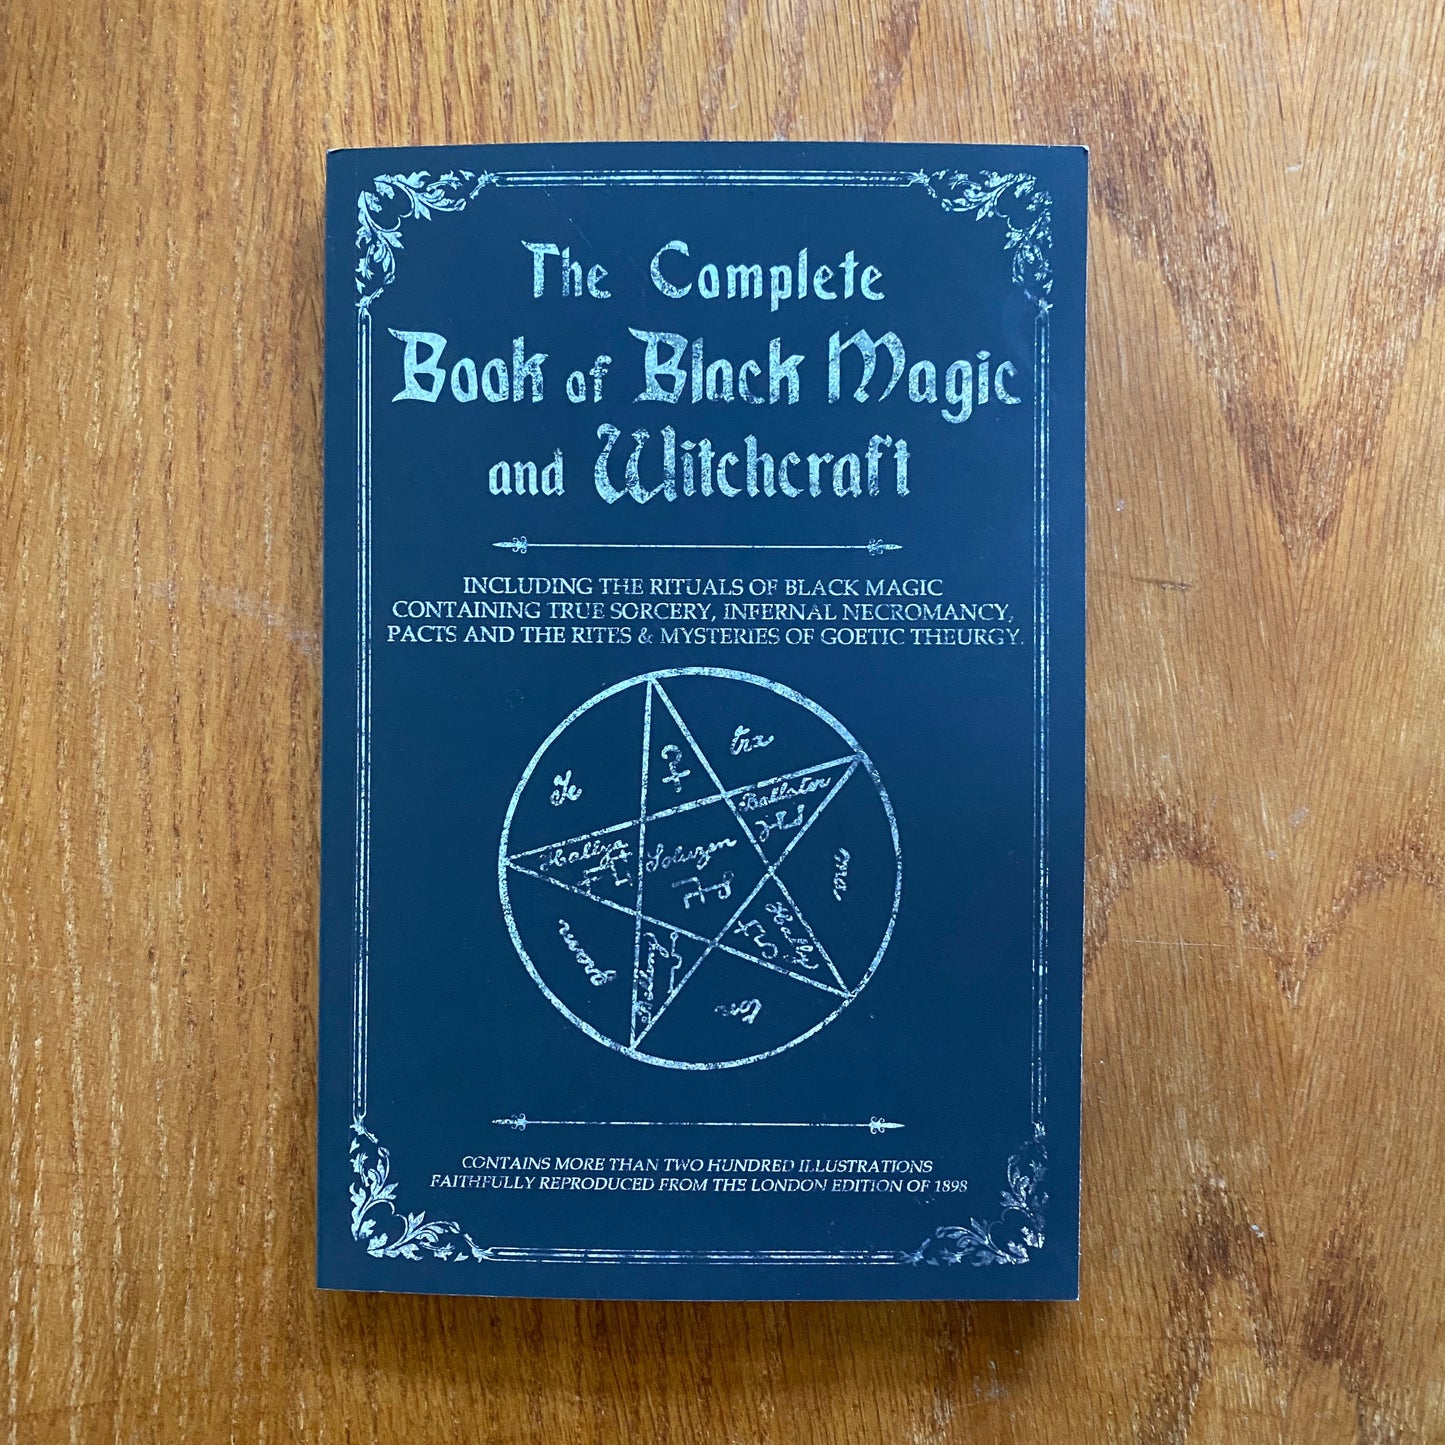 The Complete Book of Black Magic and Witchcraft: Including the rituals of Ceremonial Magic, Exorcism, True Sorcery and Infernal Necromancy Paperback – Shadow Books